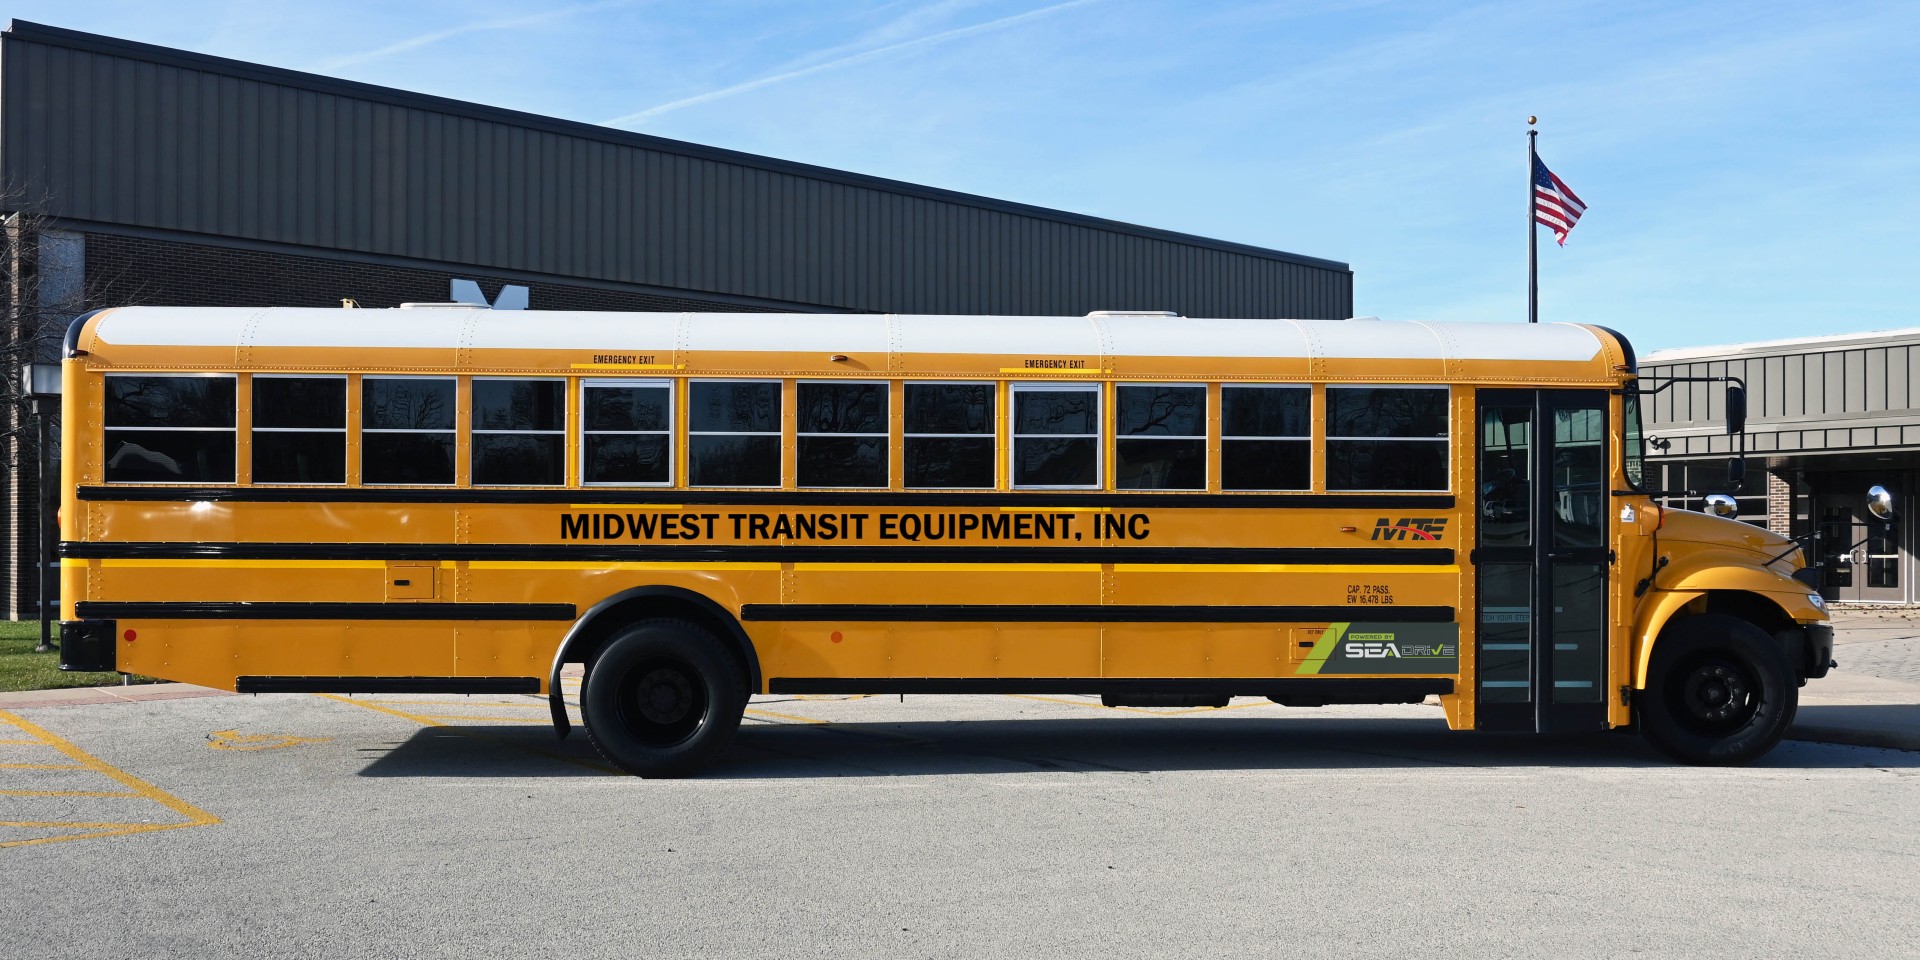 School Bus Electric - 10,000 North American school buses will be converted to battery-electric power systems